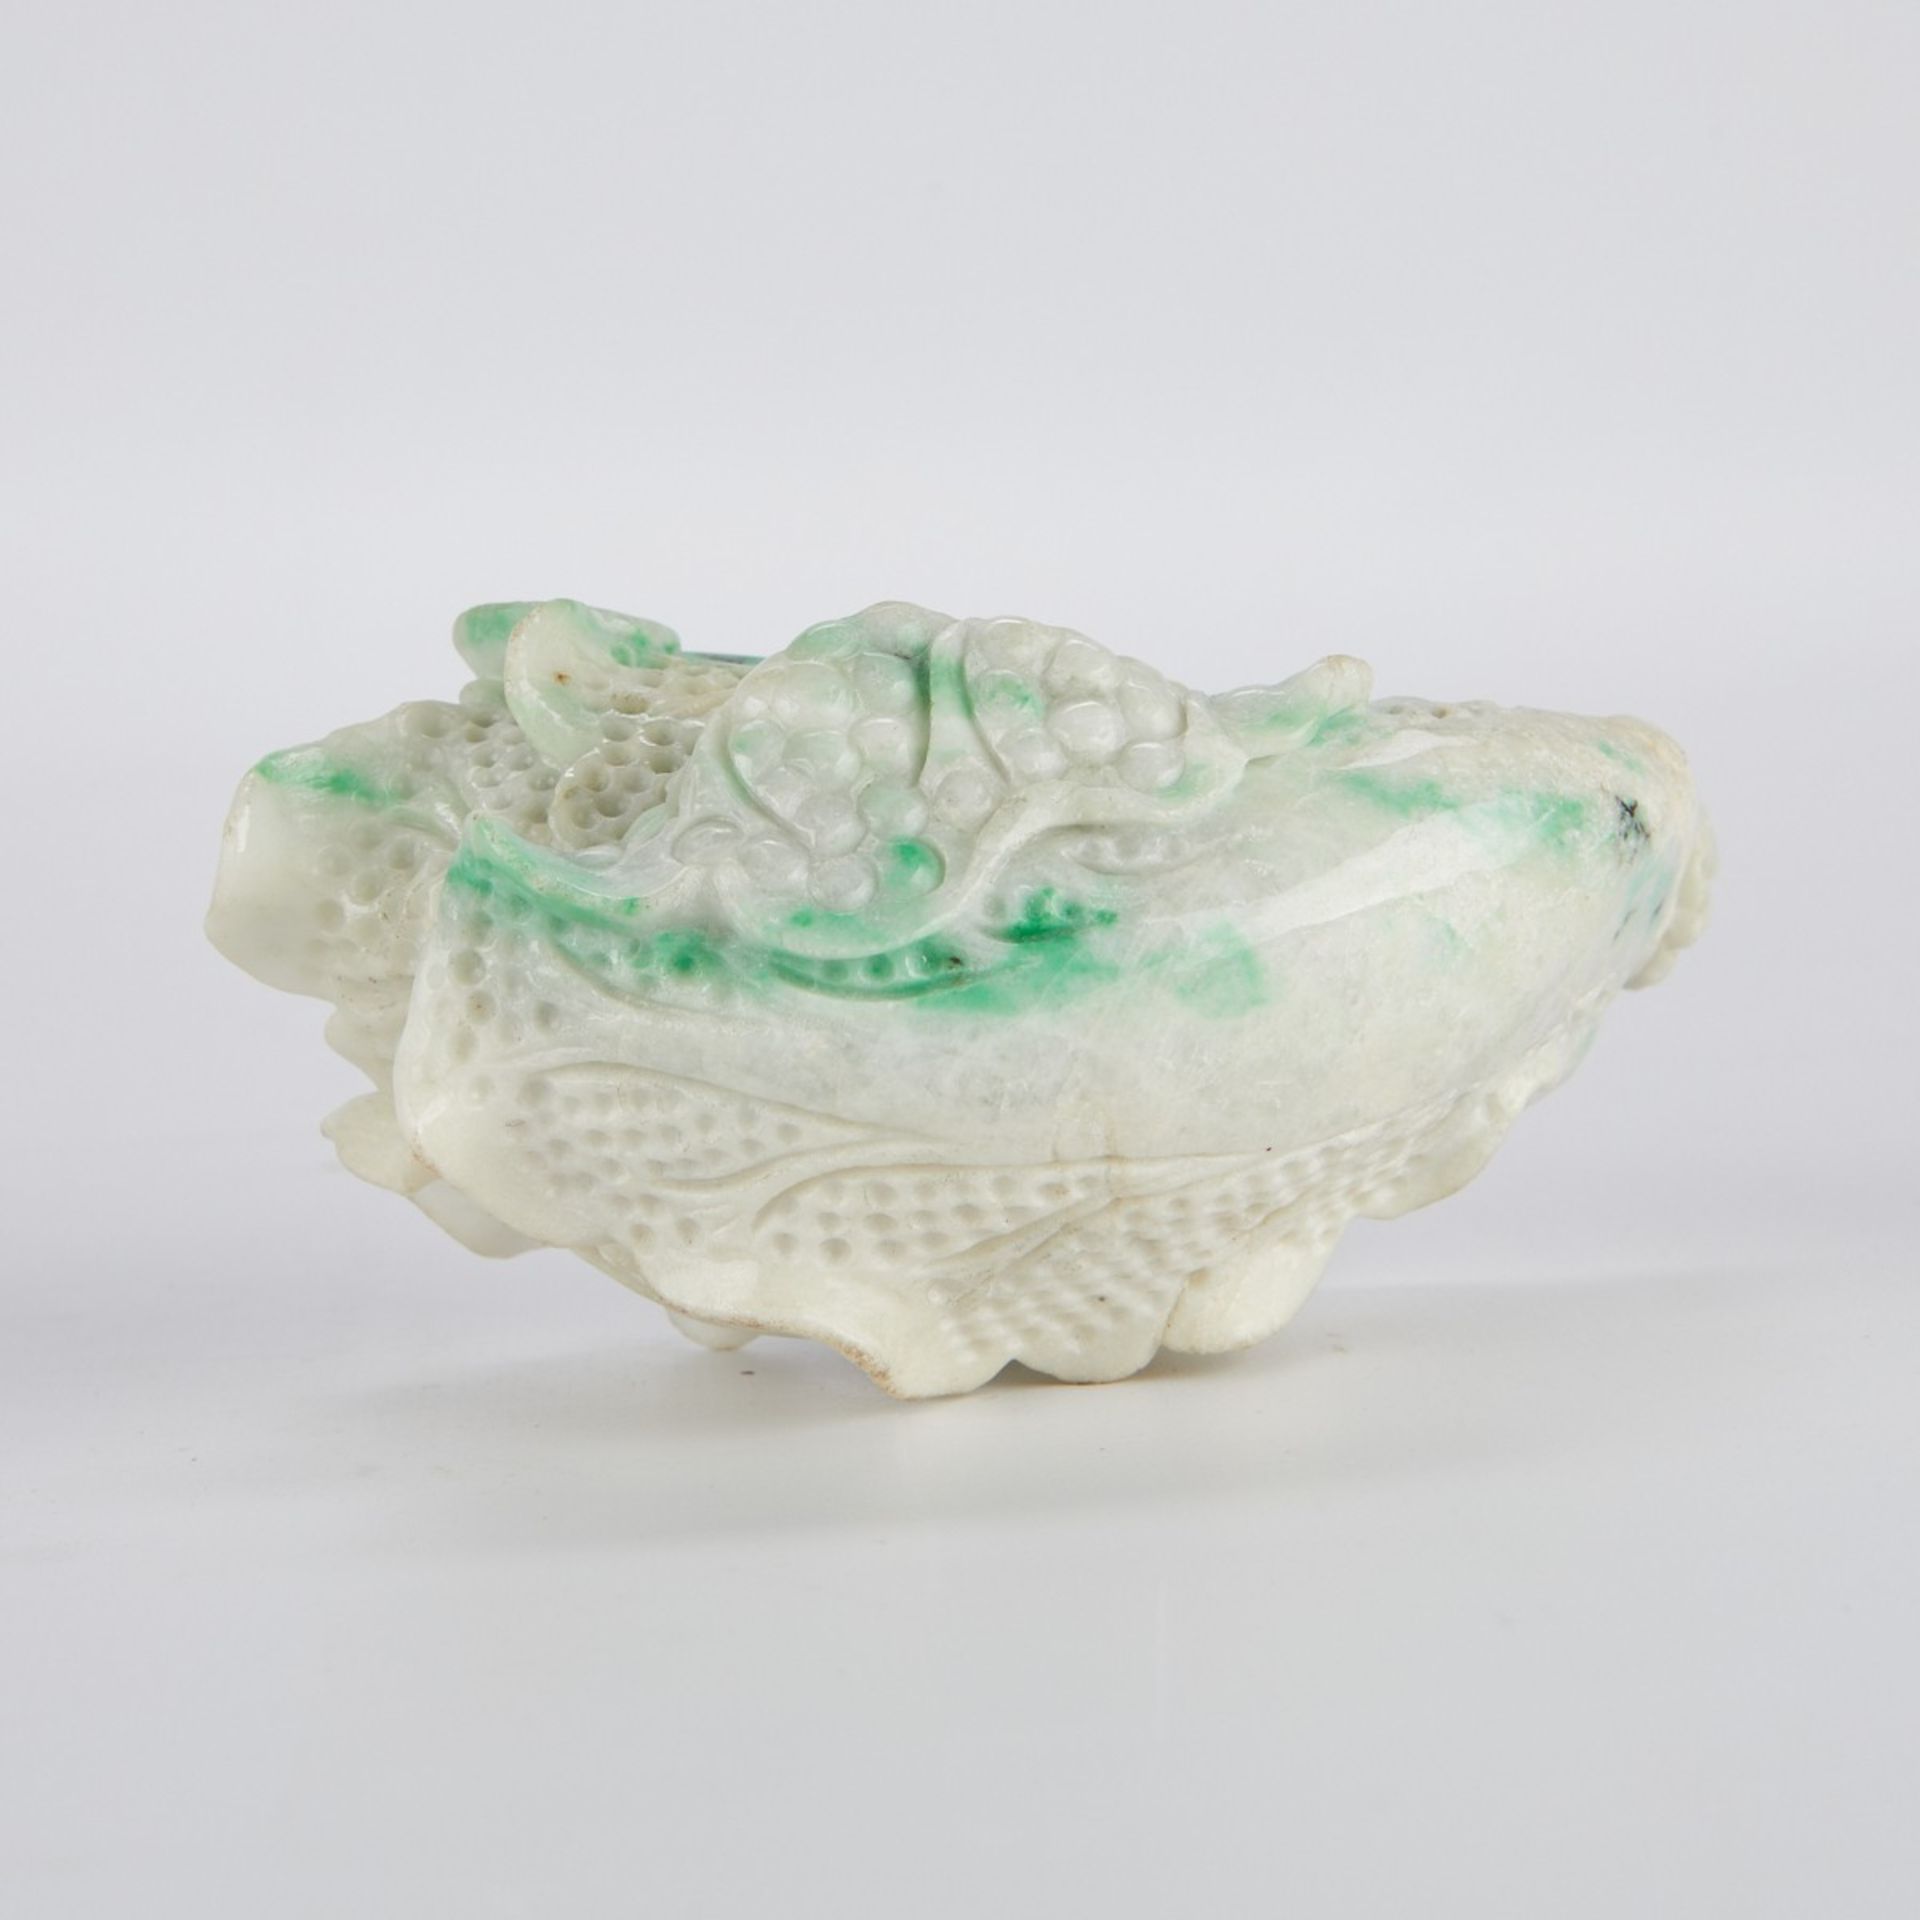 2 Fine Chinese Carved Jade Cabbages - Image 10 of 11